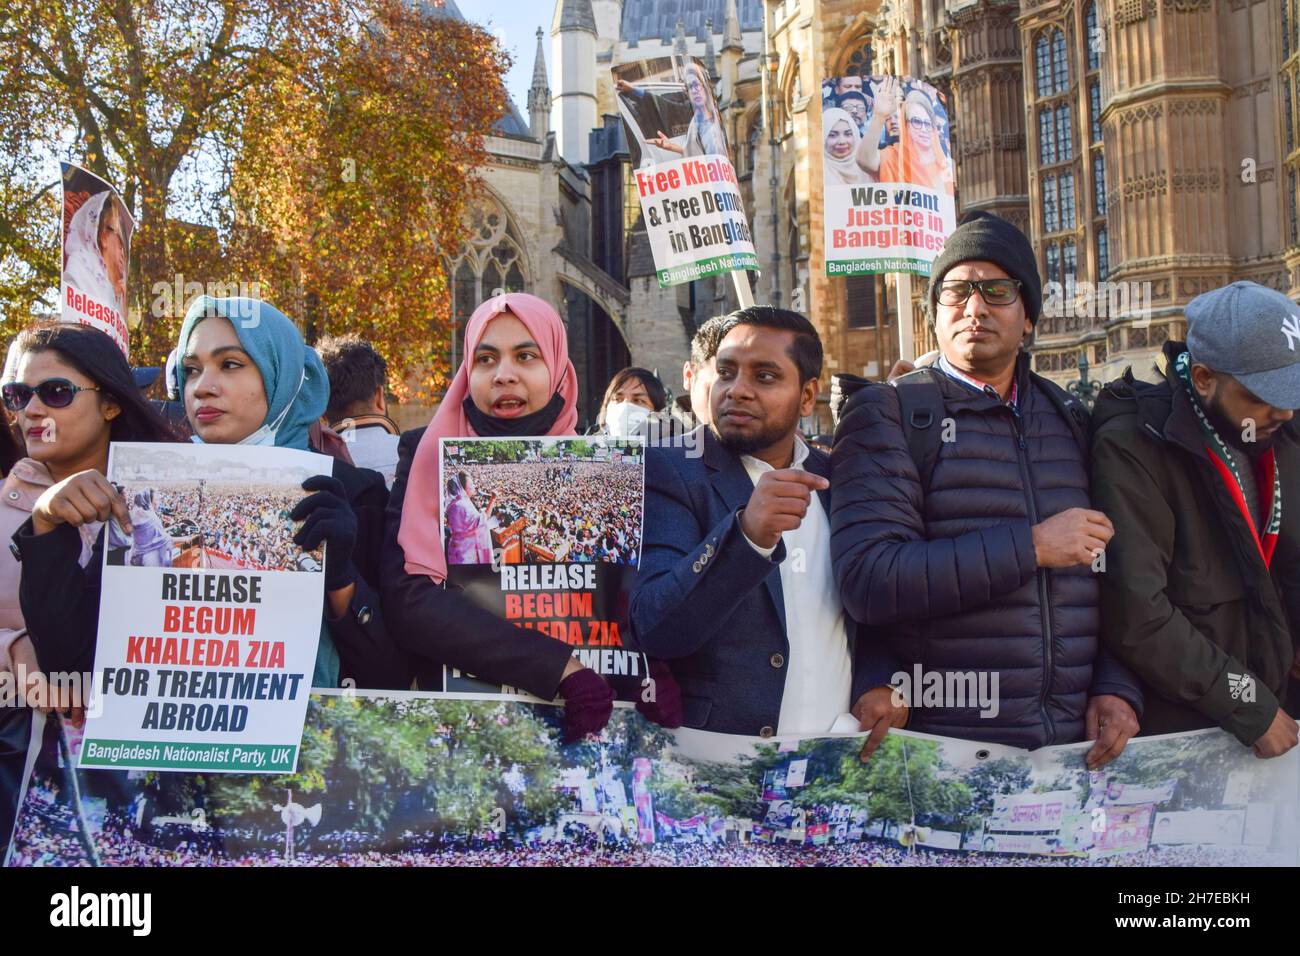 London, UK. 22nd Nov, 2021. Demonstrators hold placards in support of Khaleda Zia during the demonstration outside the UK parliament.Demonstrators gathered outside the parliament in support of former Bangladesh Prime Minister and Bangladesh Nationalist Party leader Khaleda Zia, who has been suffering health problems, demanding that she be released for treatment abroad. Credit: SOPA Images Limited/Alamy Live News Stock Photo